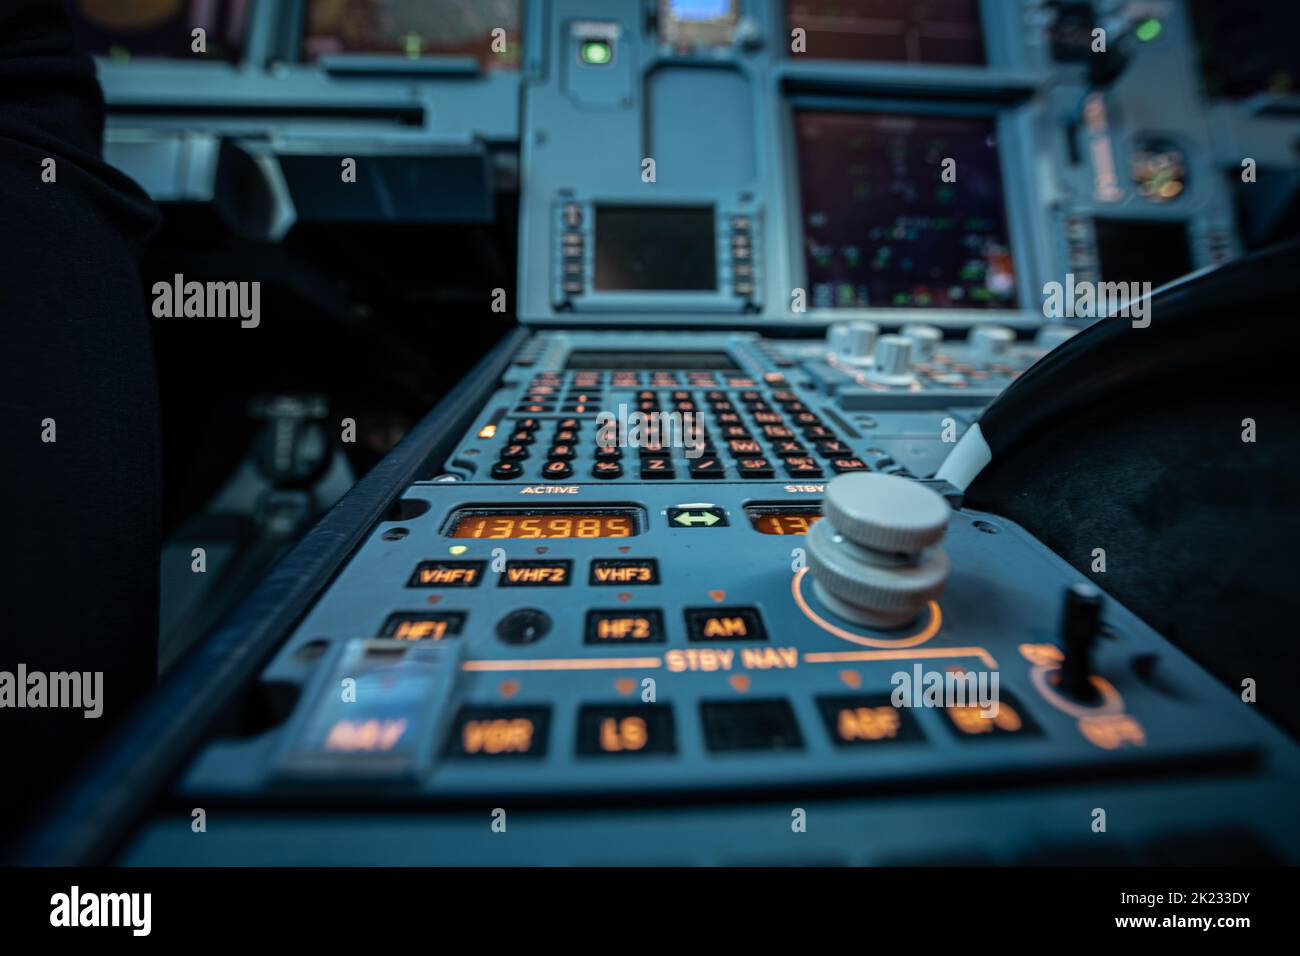 Airbus flight deck shot with instrument panel and view on the Flight management computer and CPDLC display.Airbus flight deck shot with instrument pan Stock Photo